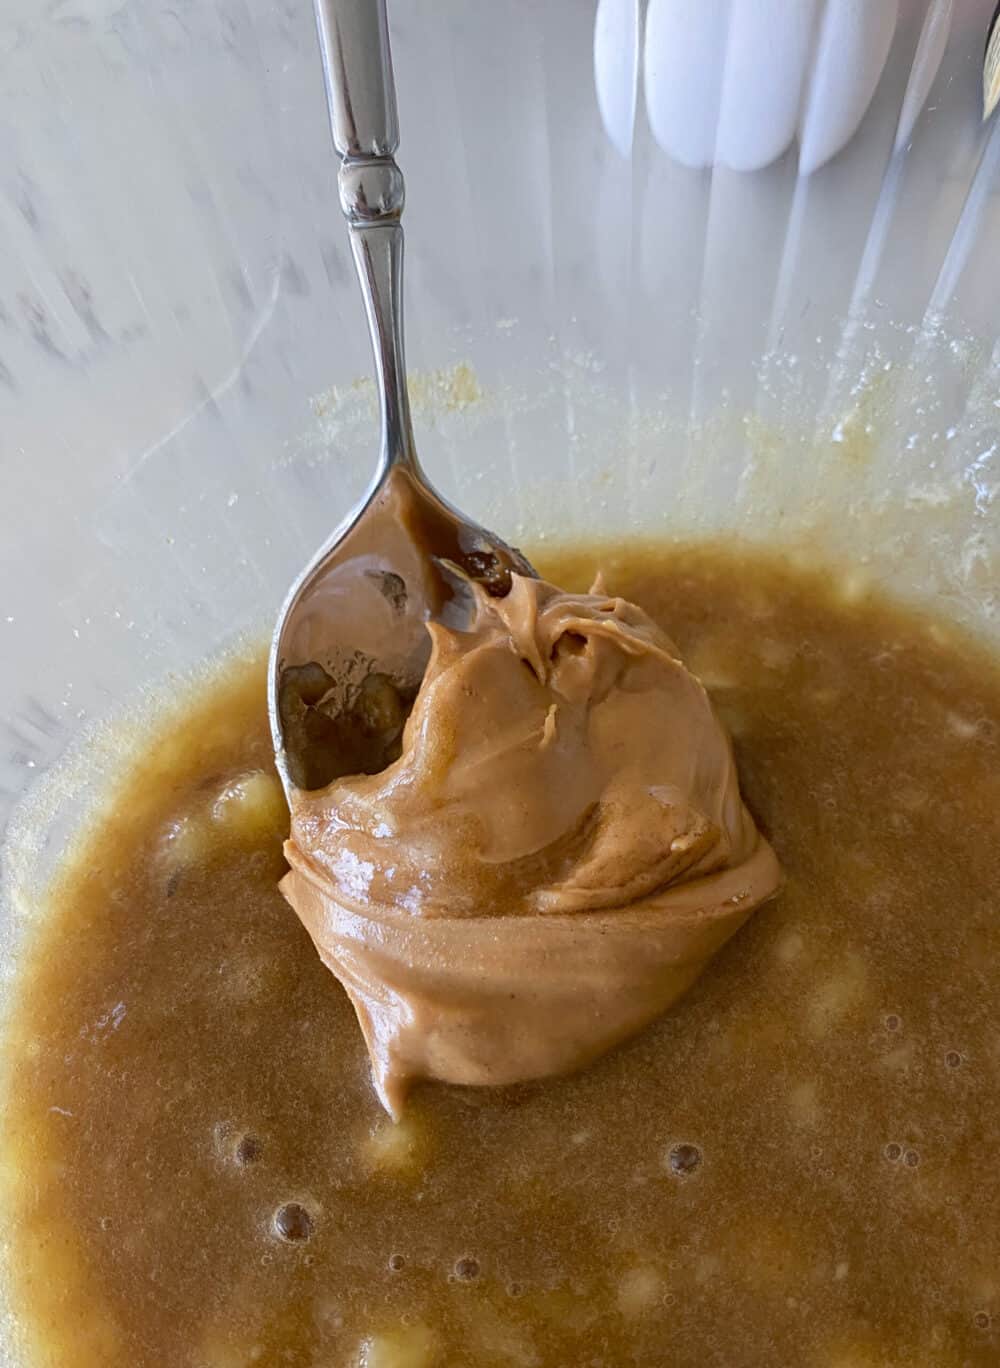 Adding Peanut Butter to the Mixing Bowl